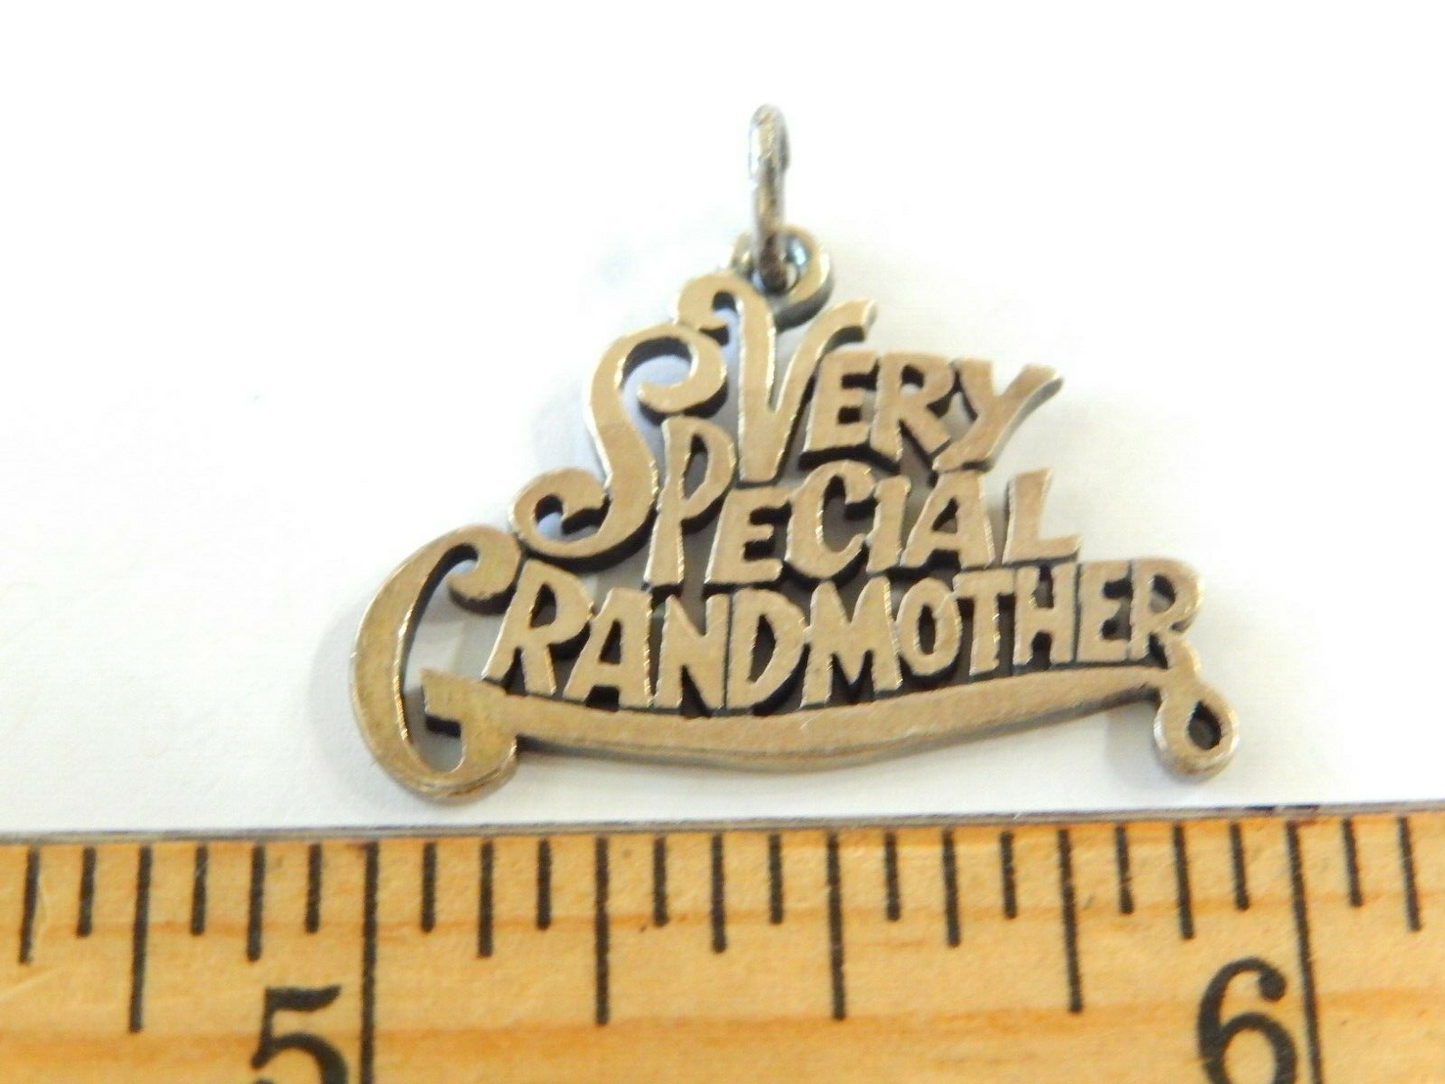 James Avery Sterling Silver Very Special Grandmother Charm